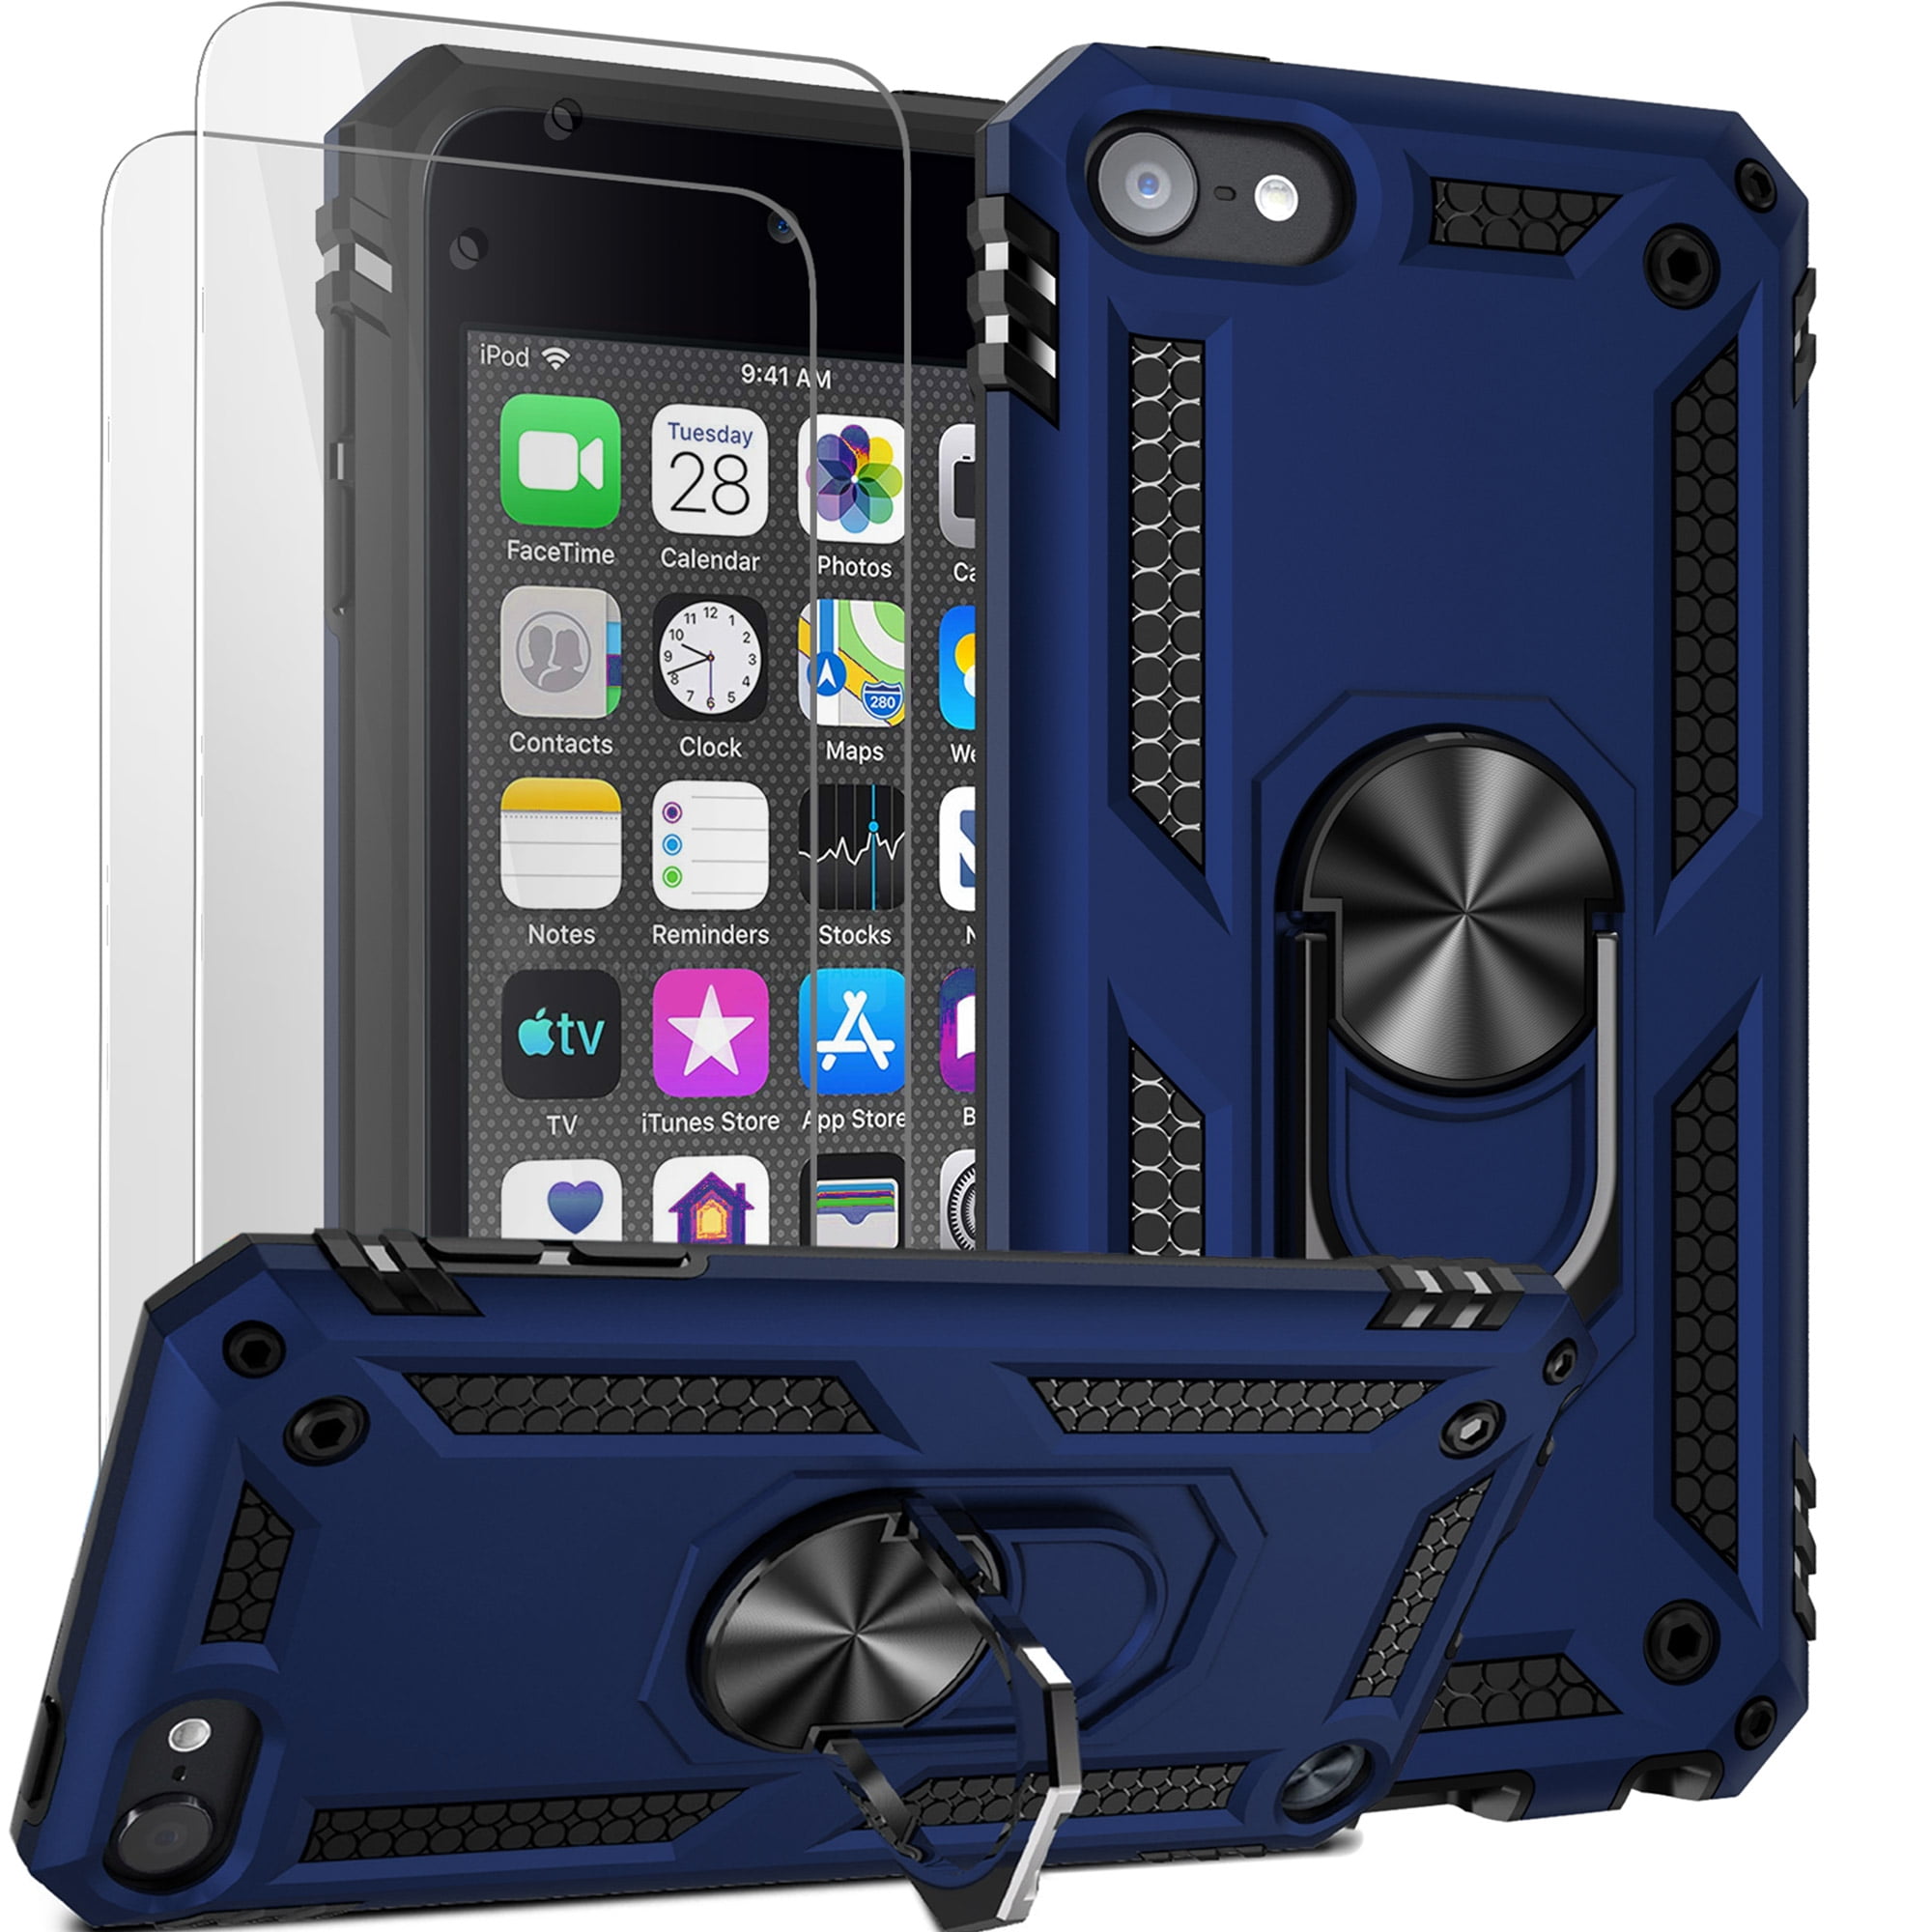 iPod Touch 7 Case,iPod Touch 6 Case with Car Mount,SLMY Hybrid Rugged Shockproof Cover with Built-in Kickstand for Apple iPod Touch 5 6 7th Generation Mint 